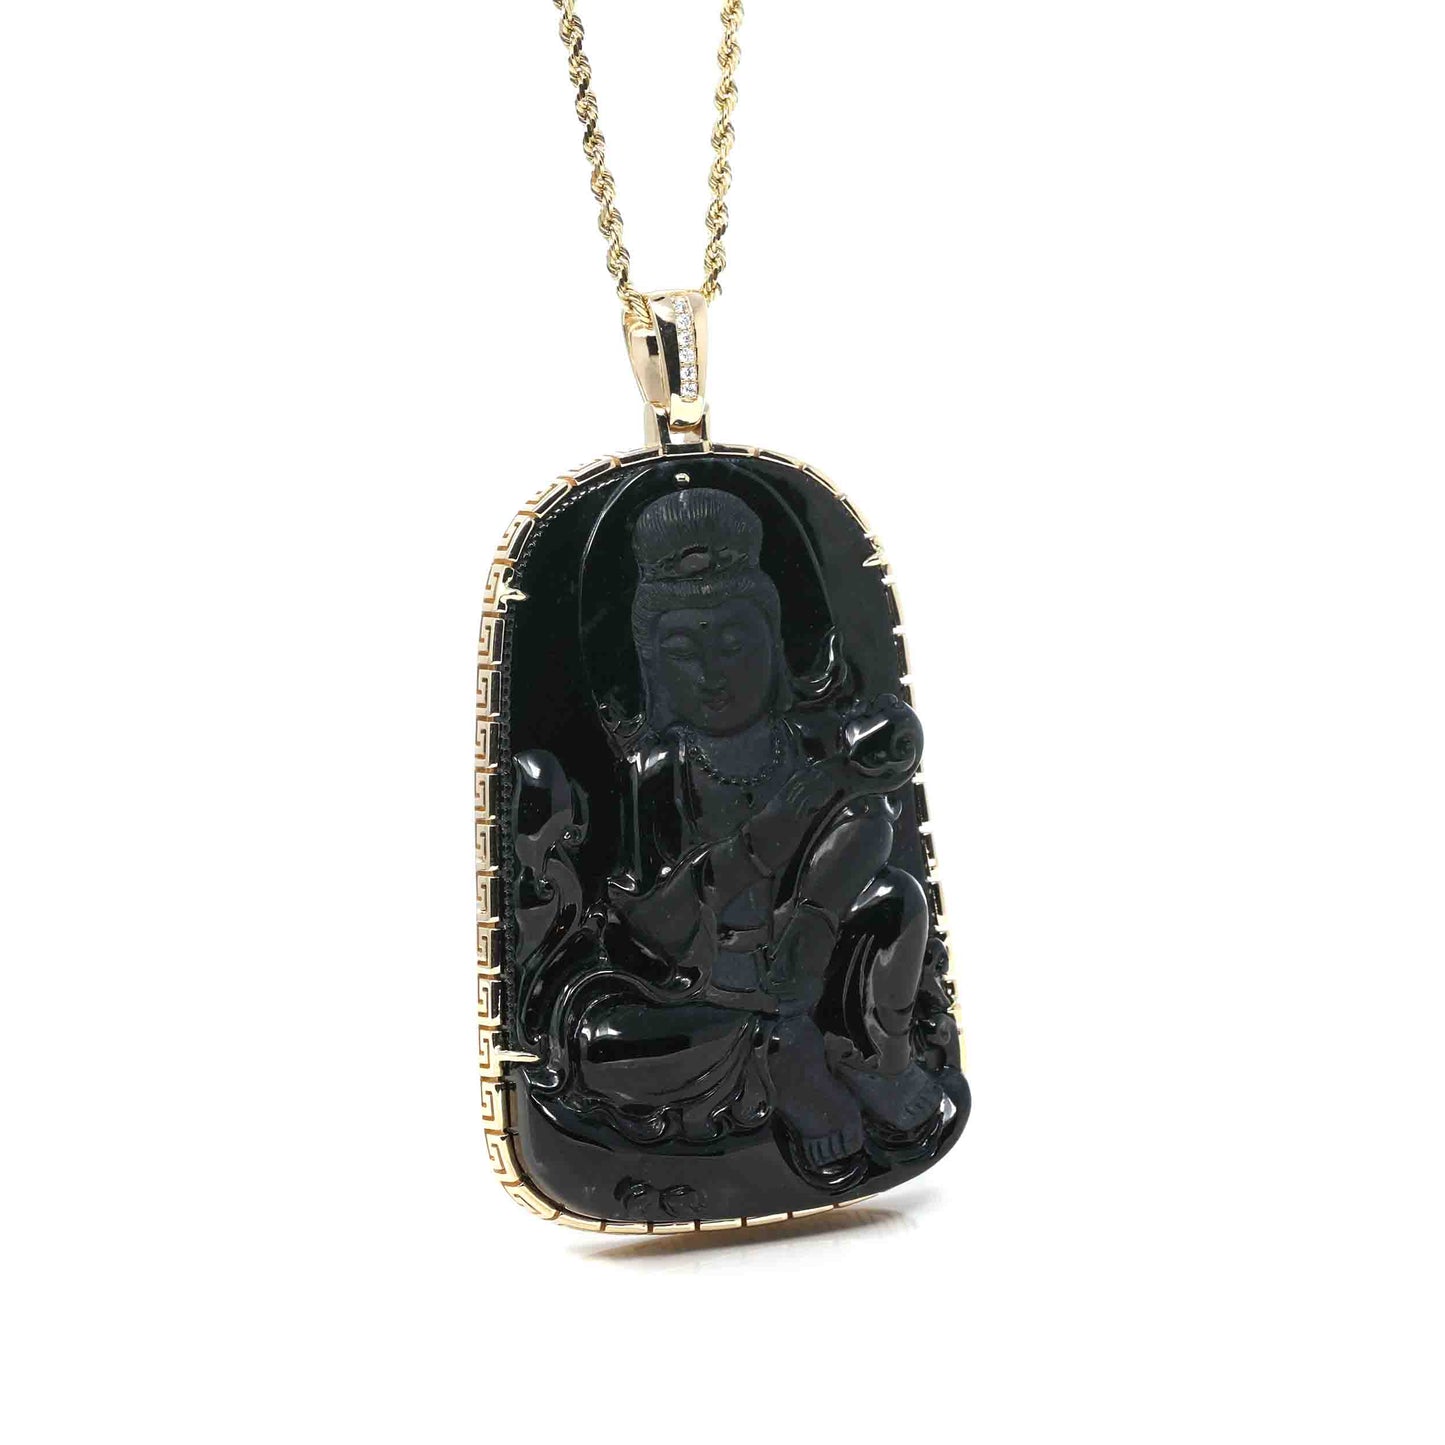 RealJade® Co. 14k Yellow Gold "Goddess of Compassion" Genuine Black Burmese Jadeite Jade Guanyin Necklace With Gold Bail